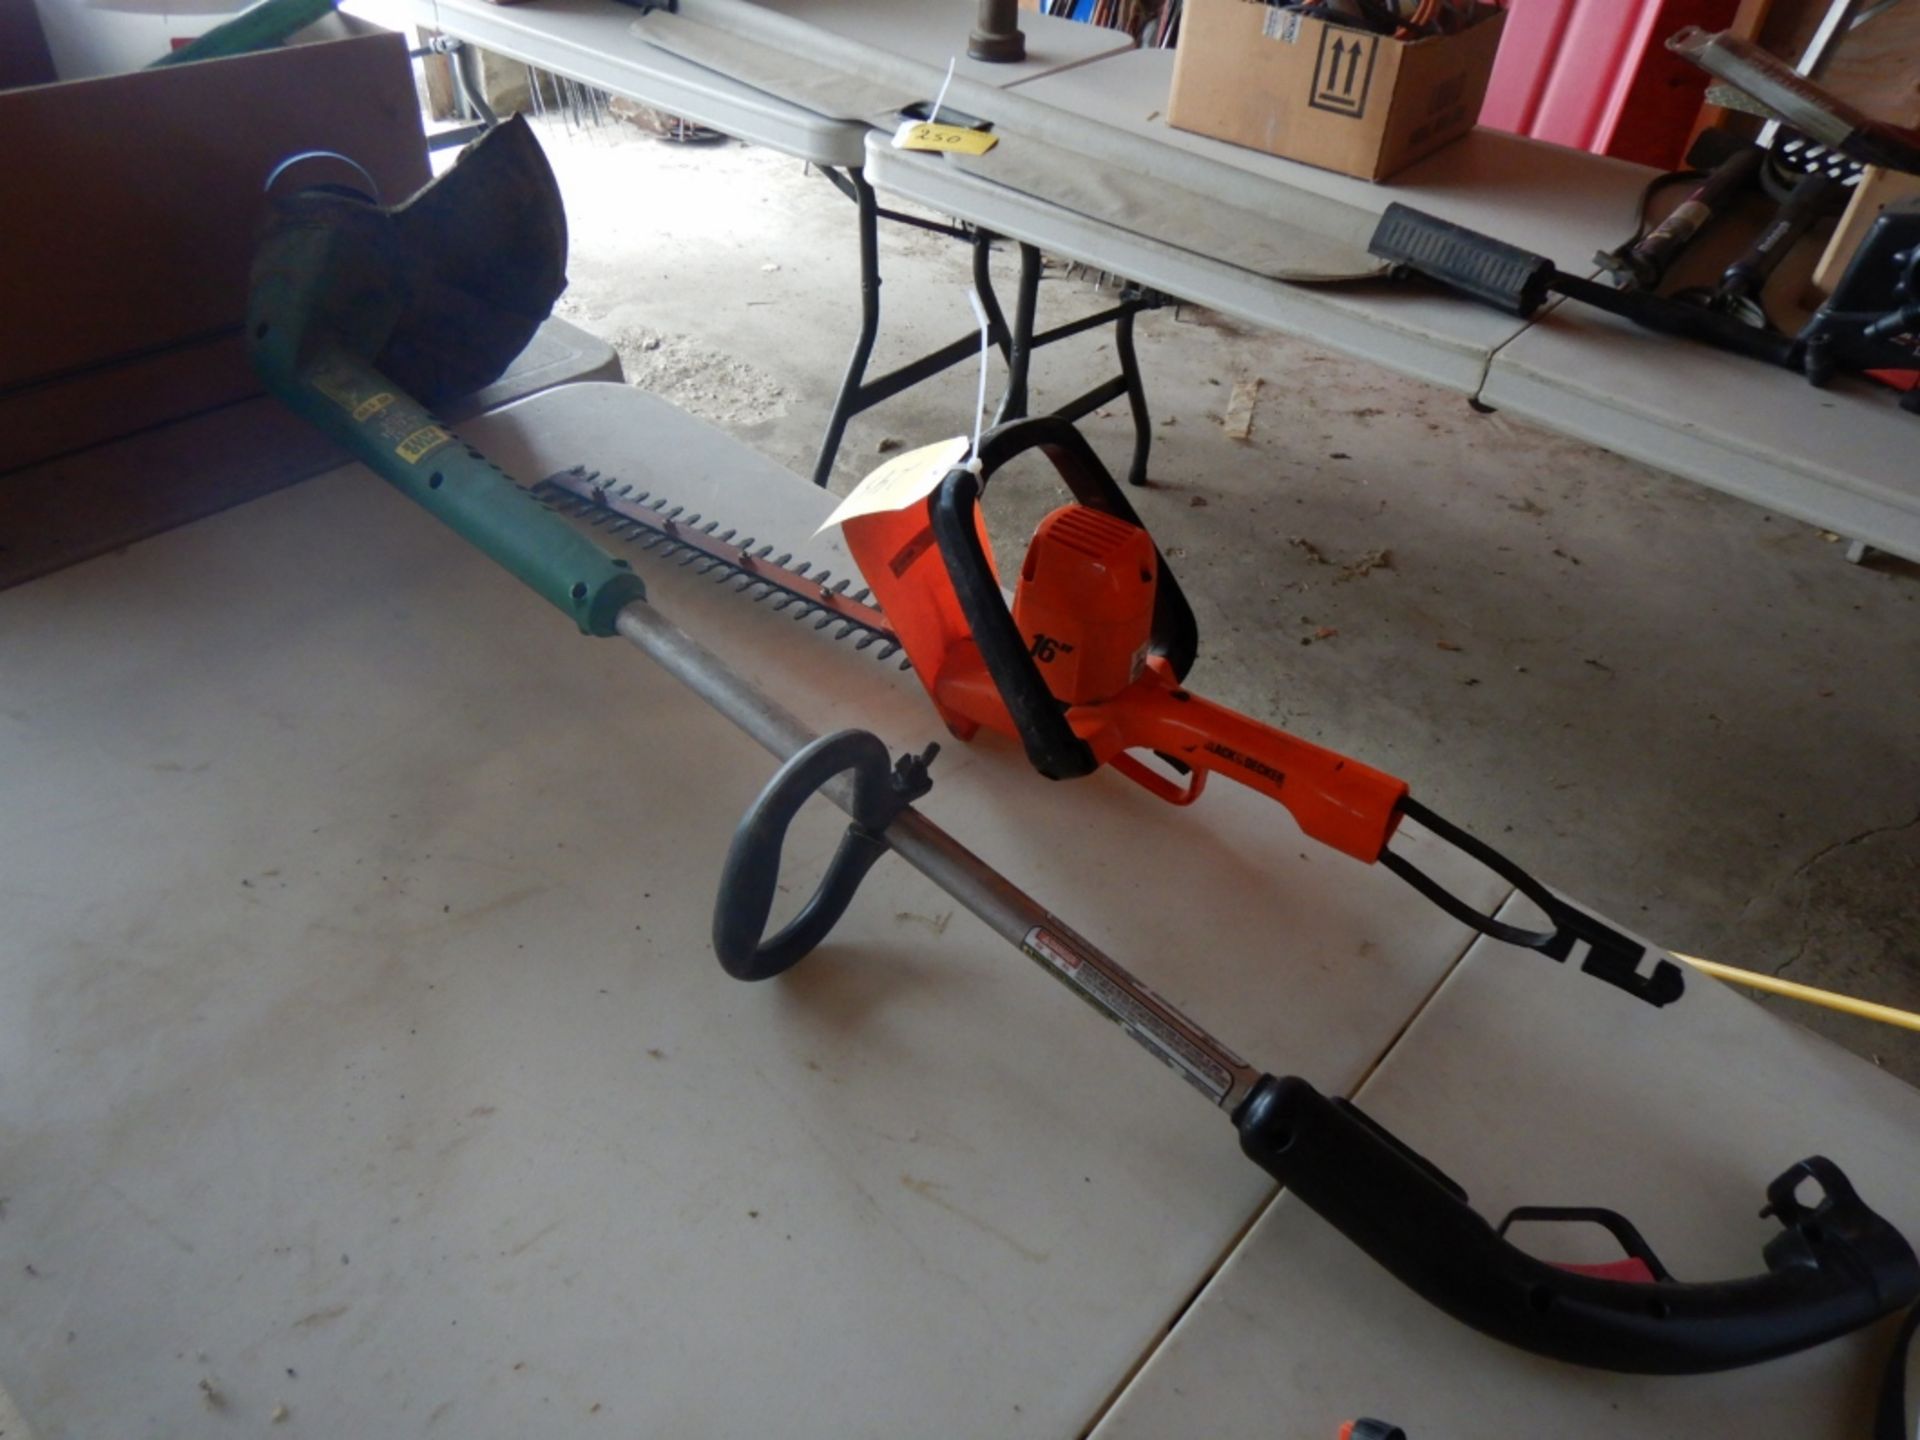 B&D16IN ELEC. HEDGE TRIMMER AND WEED EATER XT112 ELEC. STING TRIMMER